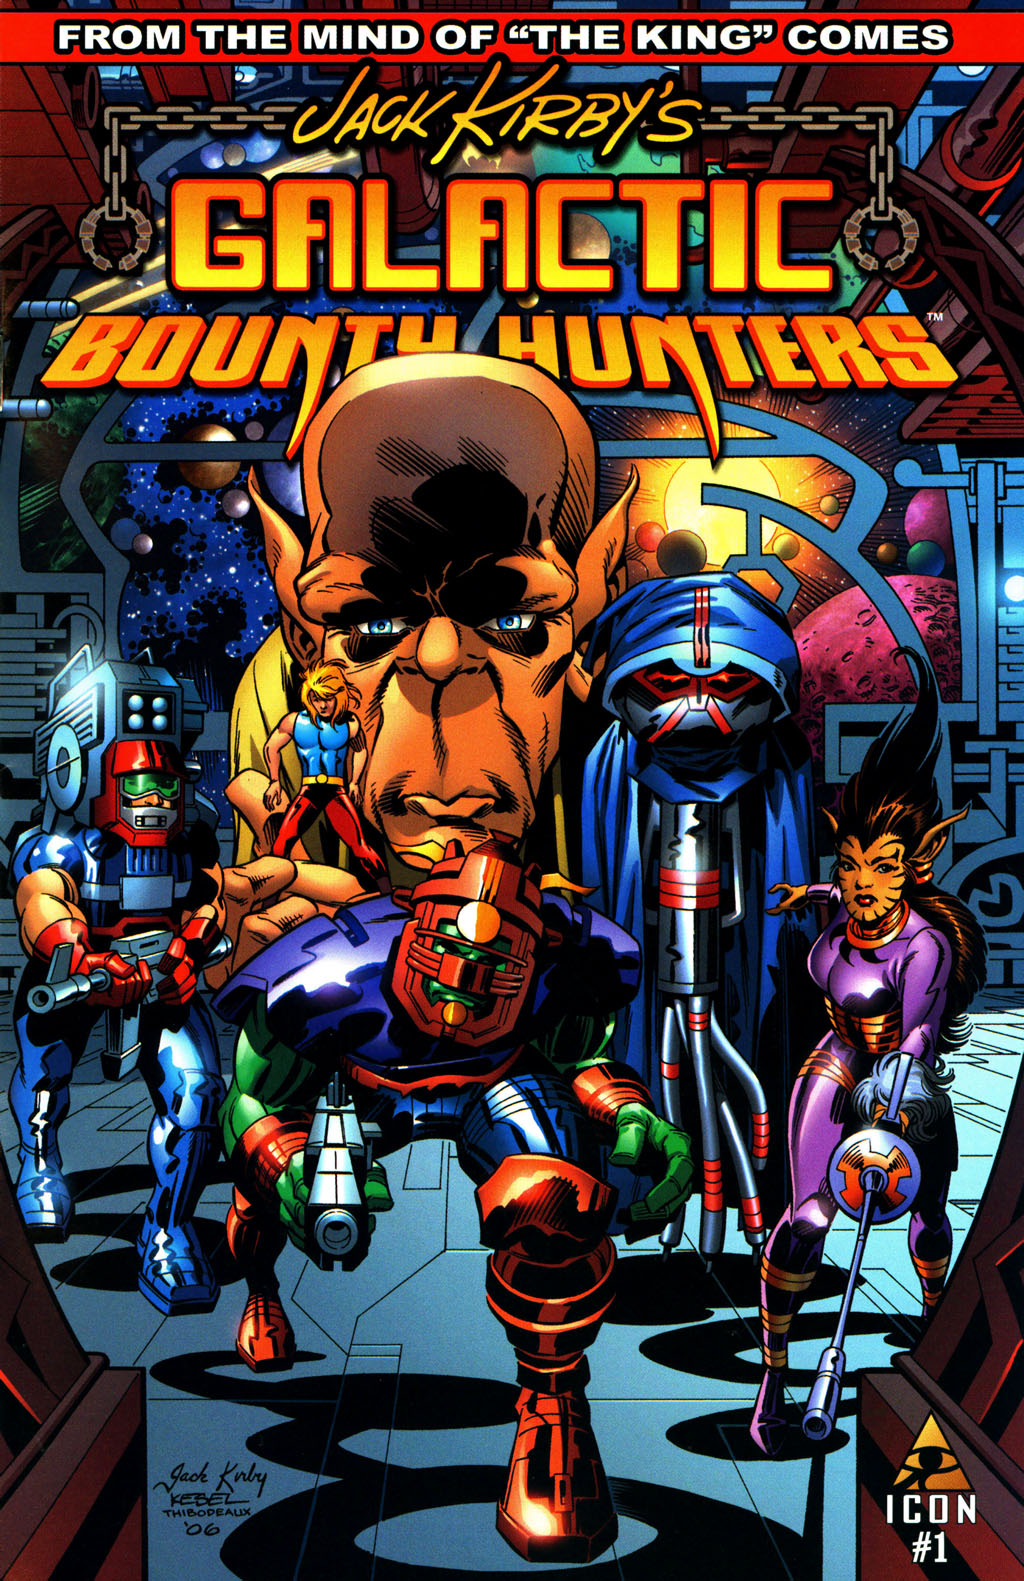 Read online Jack Kirby's Galactic Bounty Hunters comic -  Issue #1 - 1